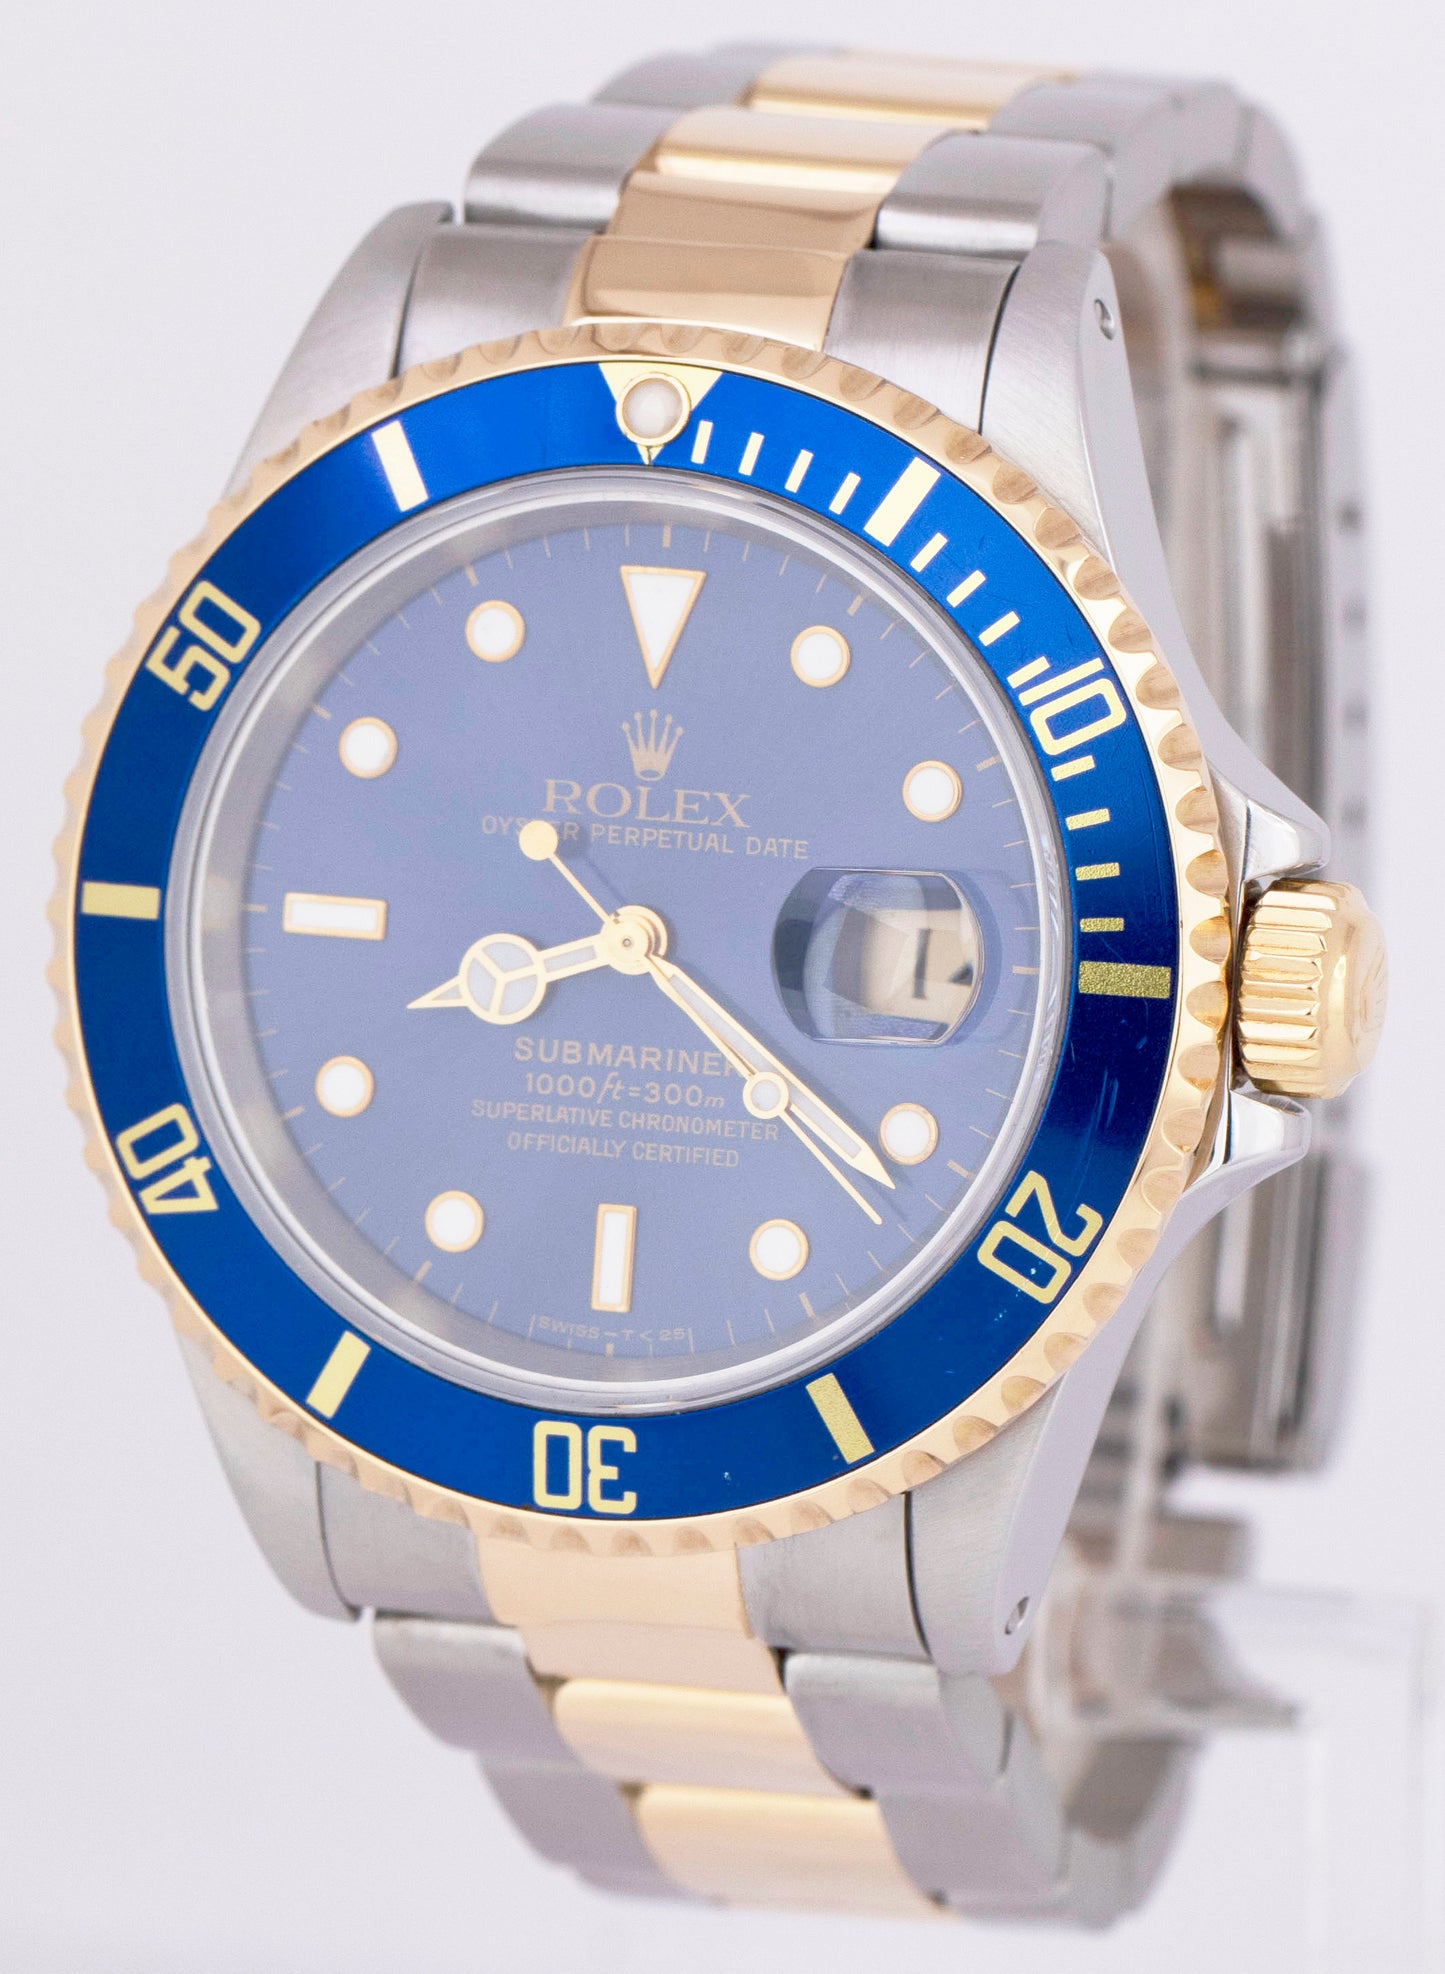 Rolex Submariner Date Two-Tone 18K Gold Stainless Steel Blue 40mm Watch 16613